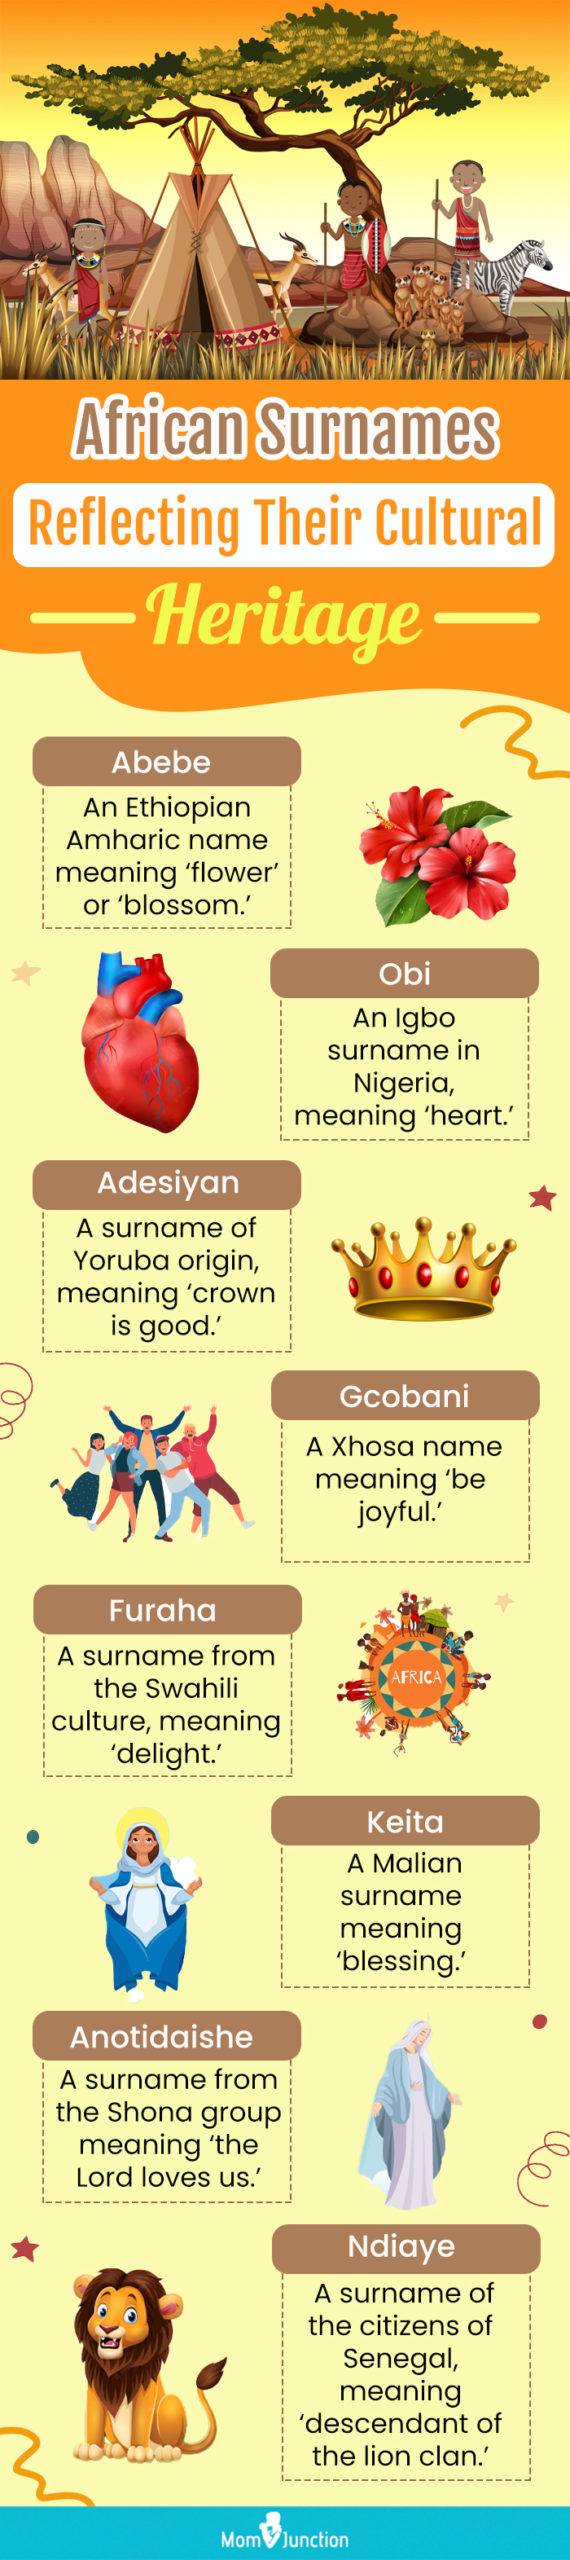 african surnames for babies (infographic)